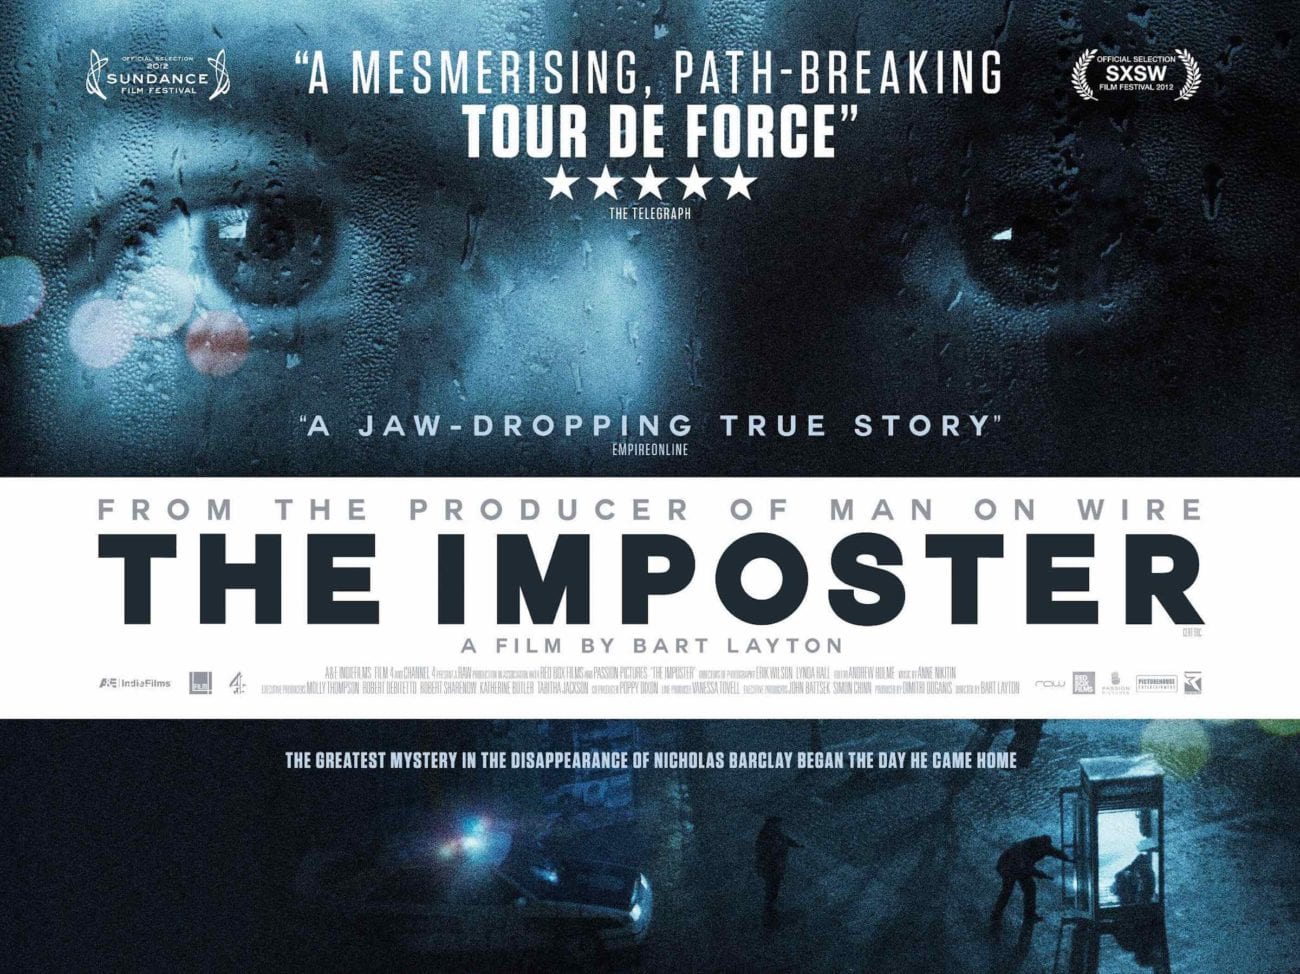 The Netflix documentary 'The Imposter' may be one of the most twisty true crime stories we’ve ever encountered. Here's why.